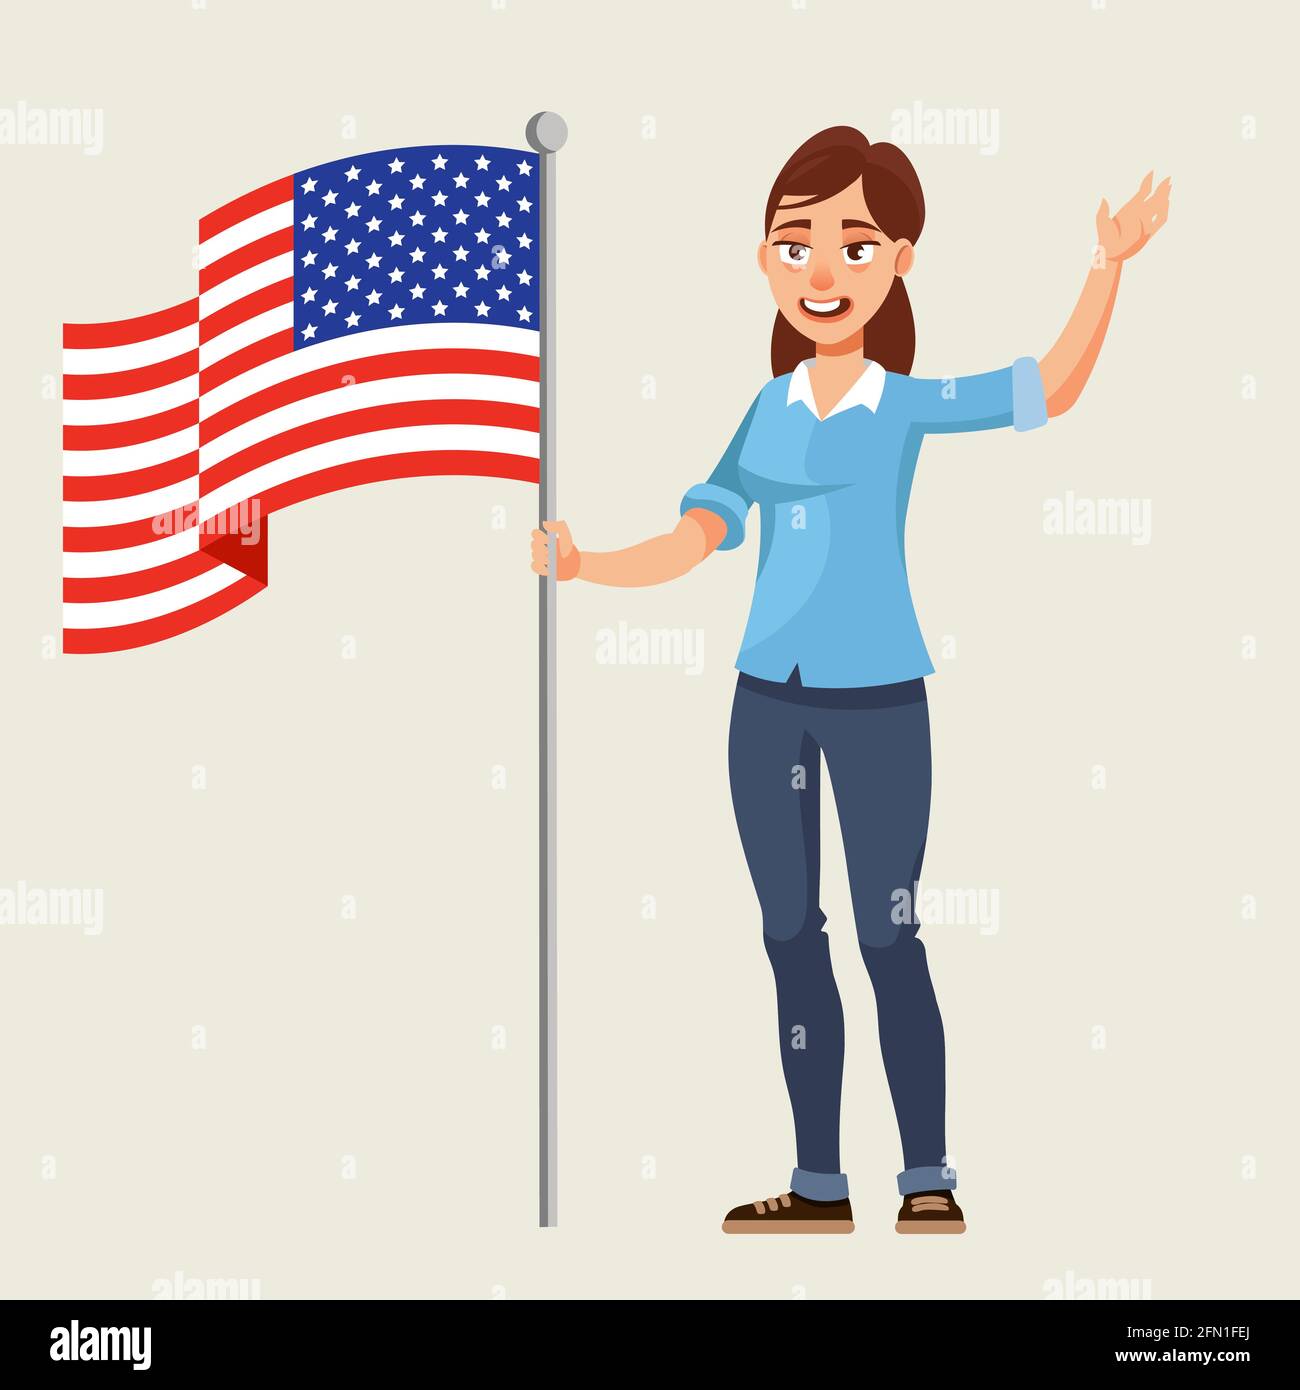 Woman standing with american flag. Female person in cartoon style. Stock Vector